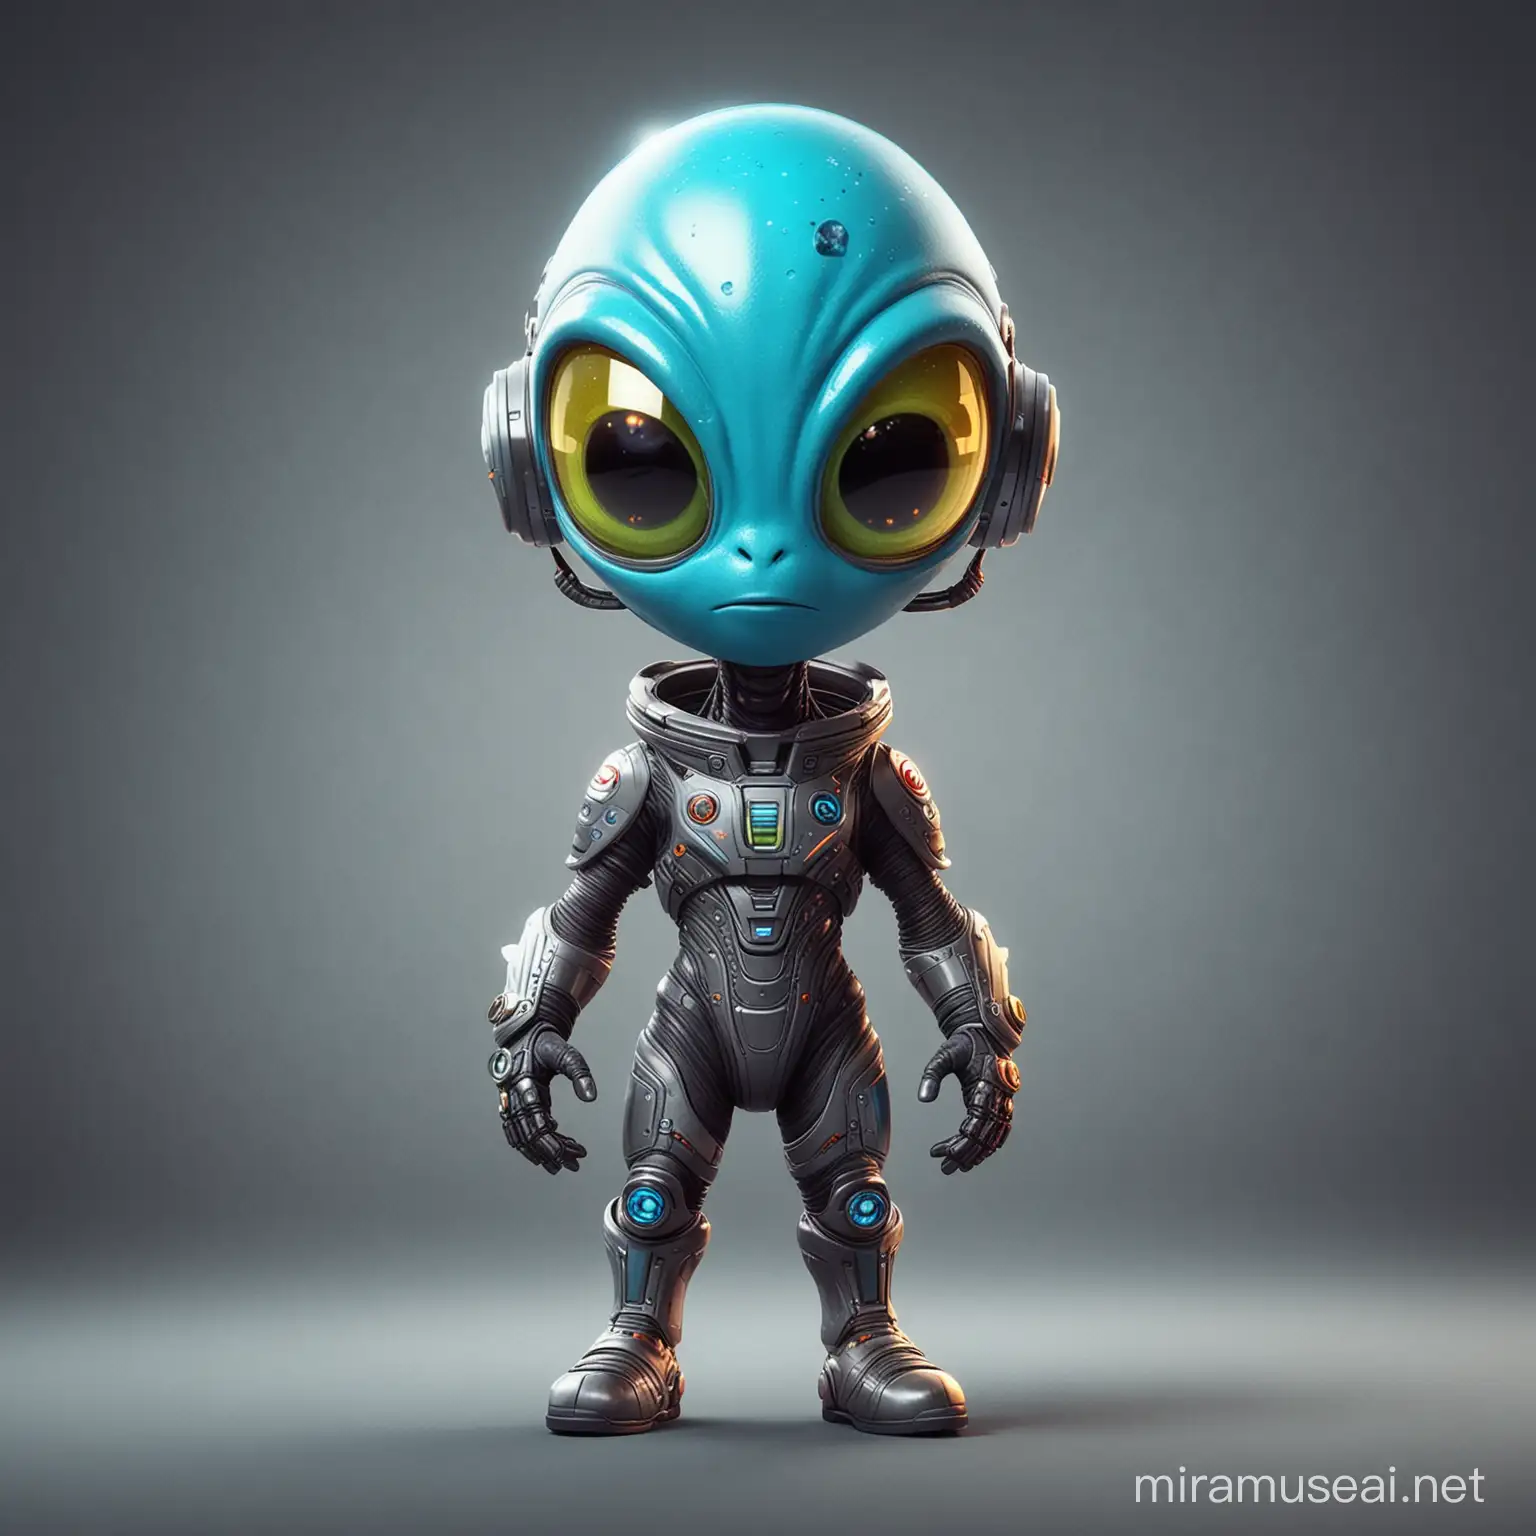 Futuristic Friendly Alien Mascot for Galactic Innovations